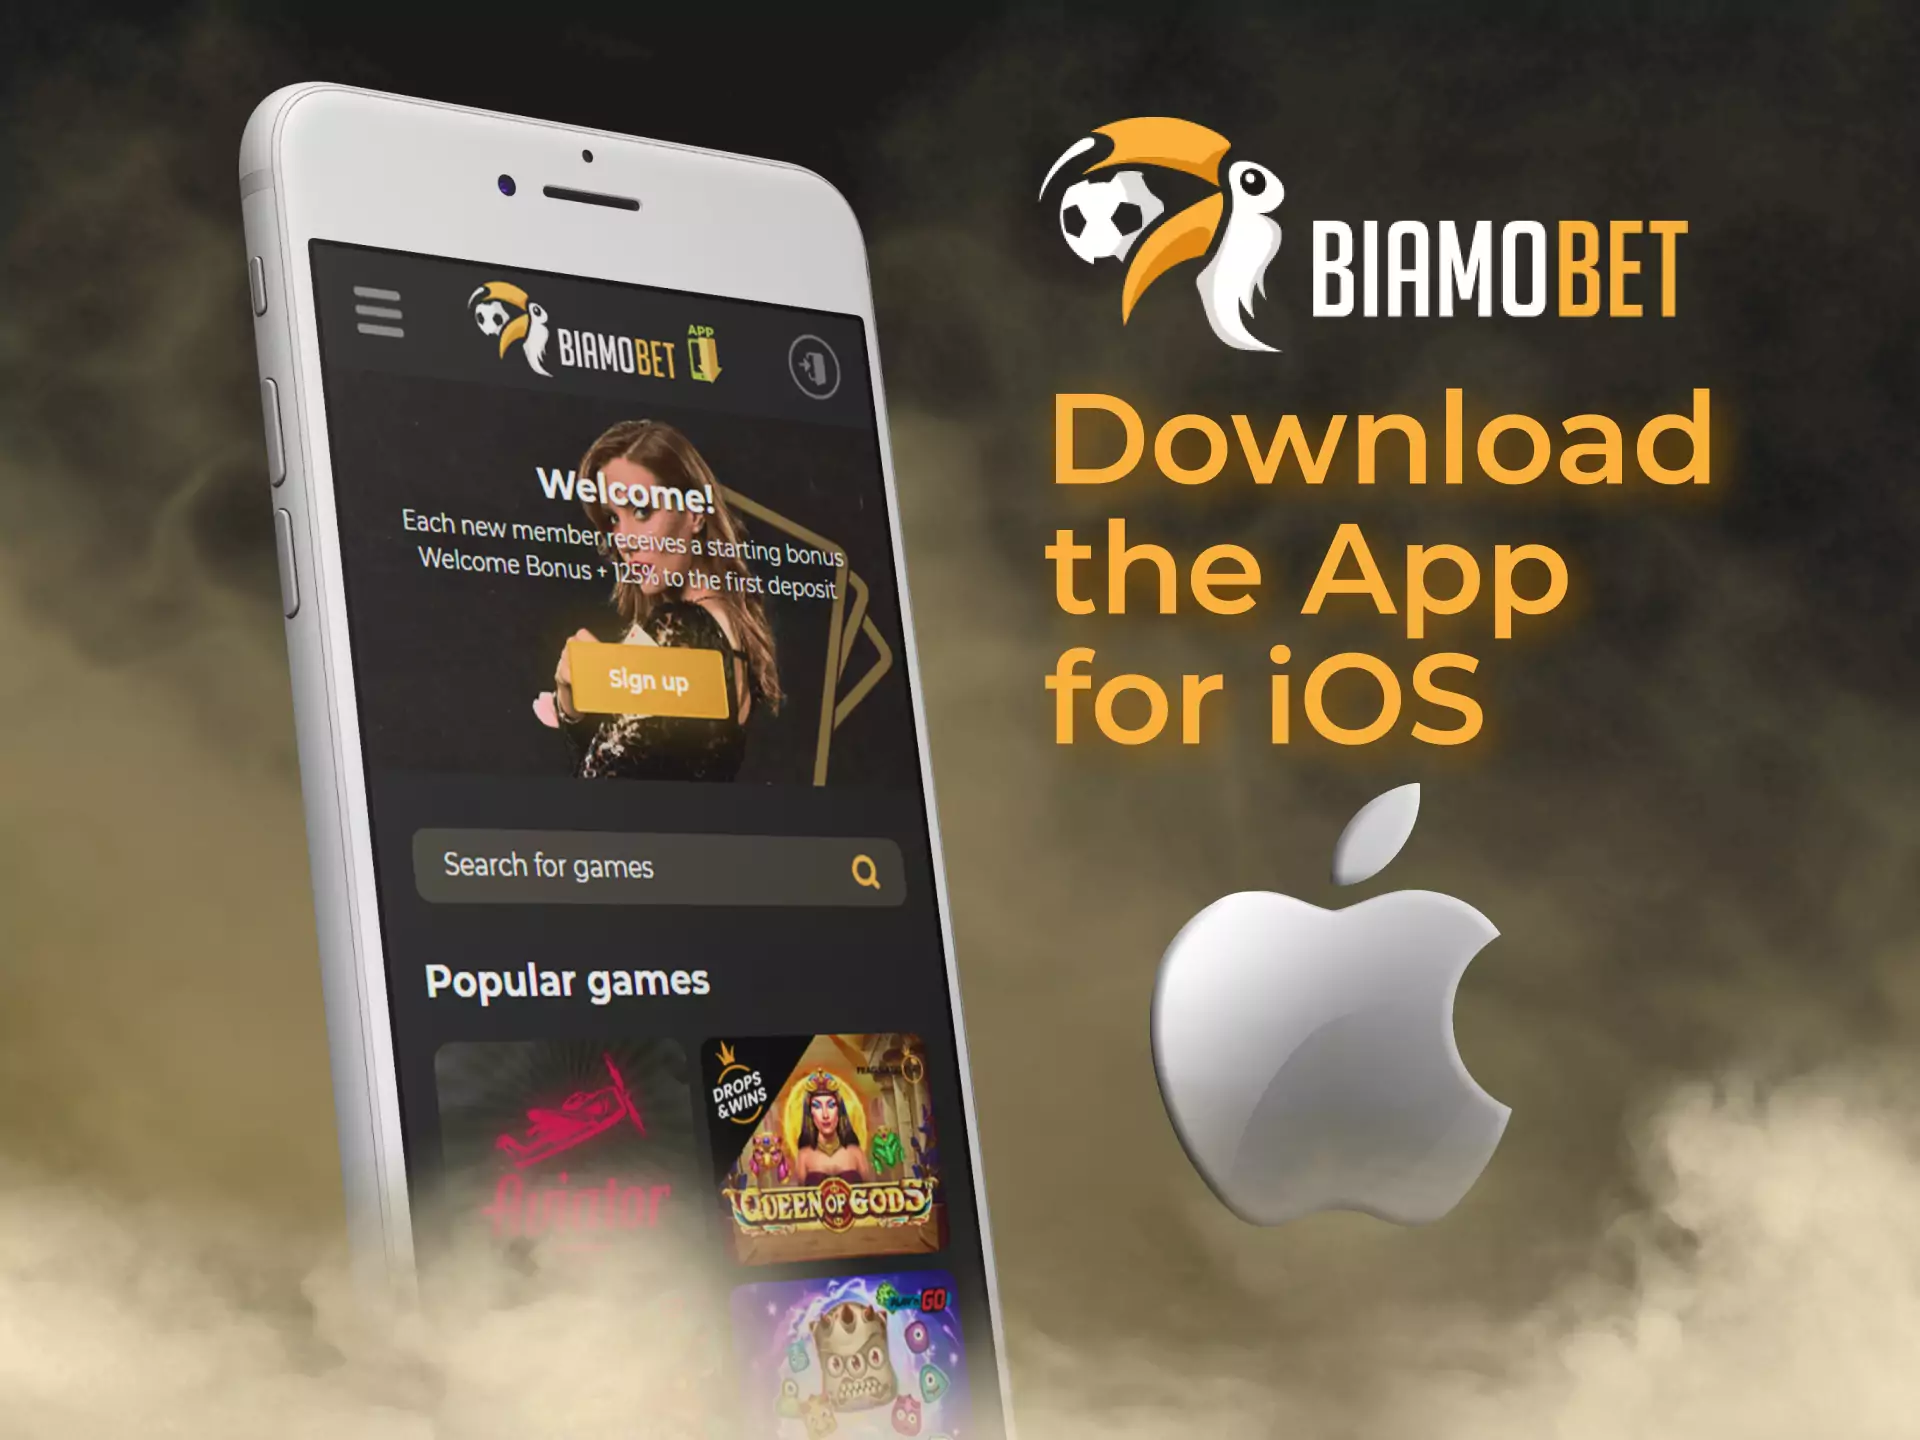 Click on the link to find the Biamobet app for iOS.